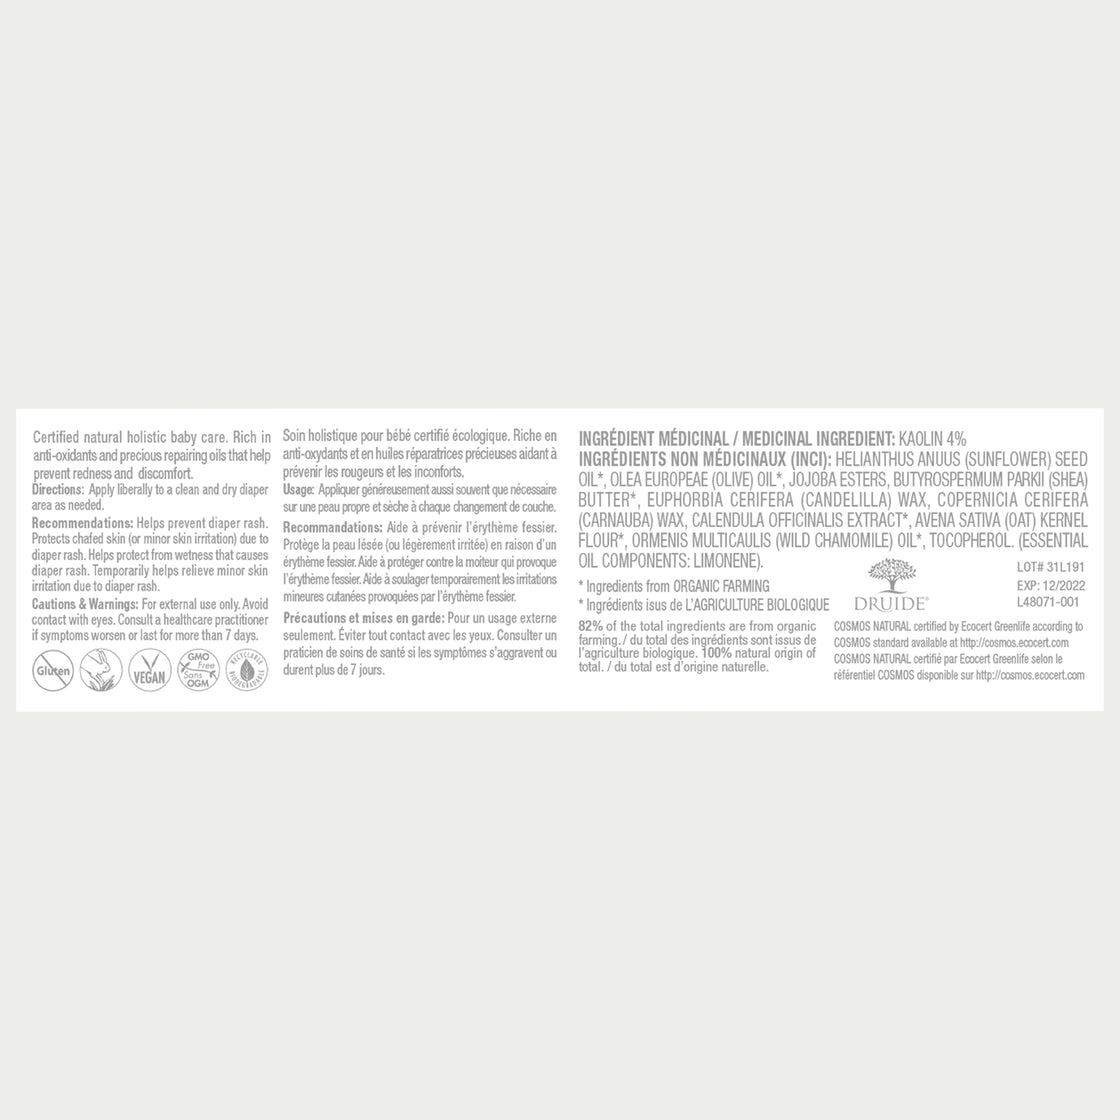 Druide Biolove Organic Baby Balm packaging label with product benefits, ingredients, certifications, and origin.